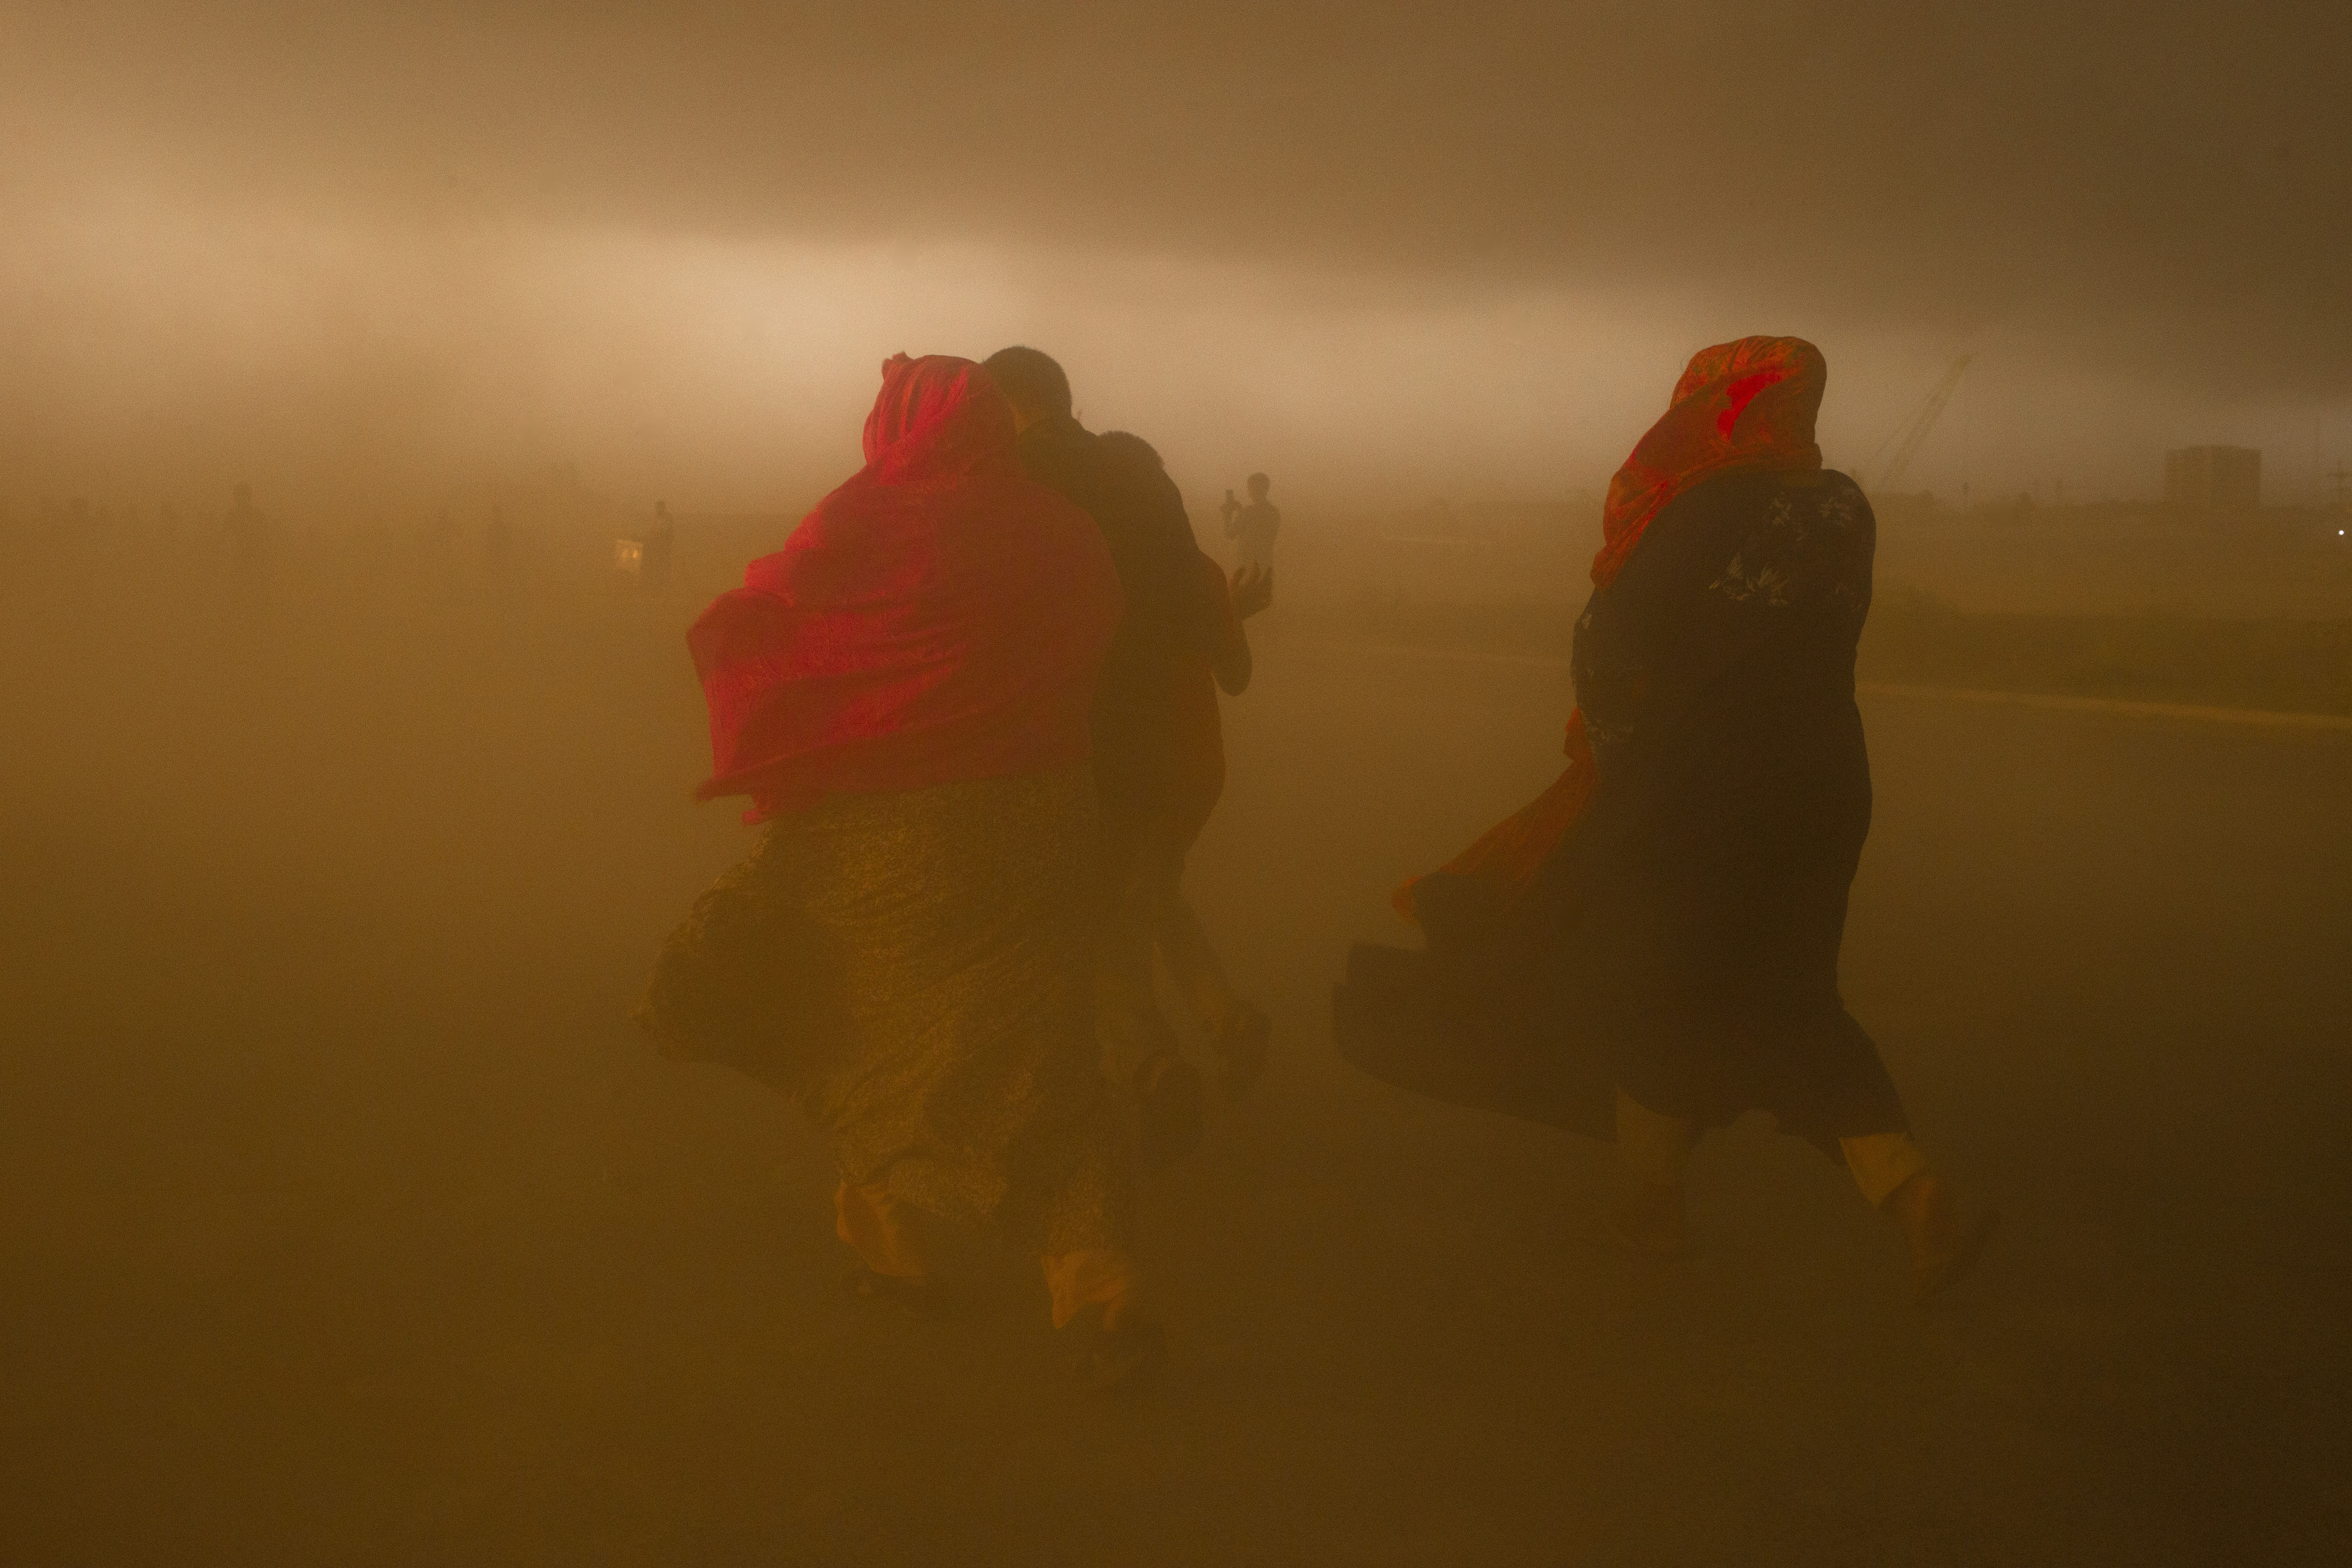 People run in search of shelter during a sandstorm.